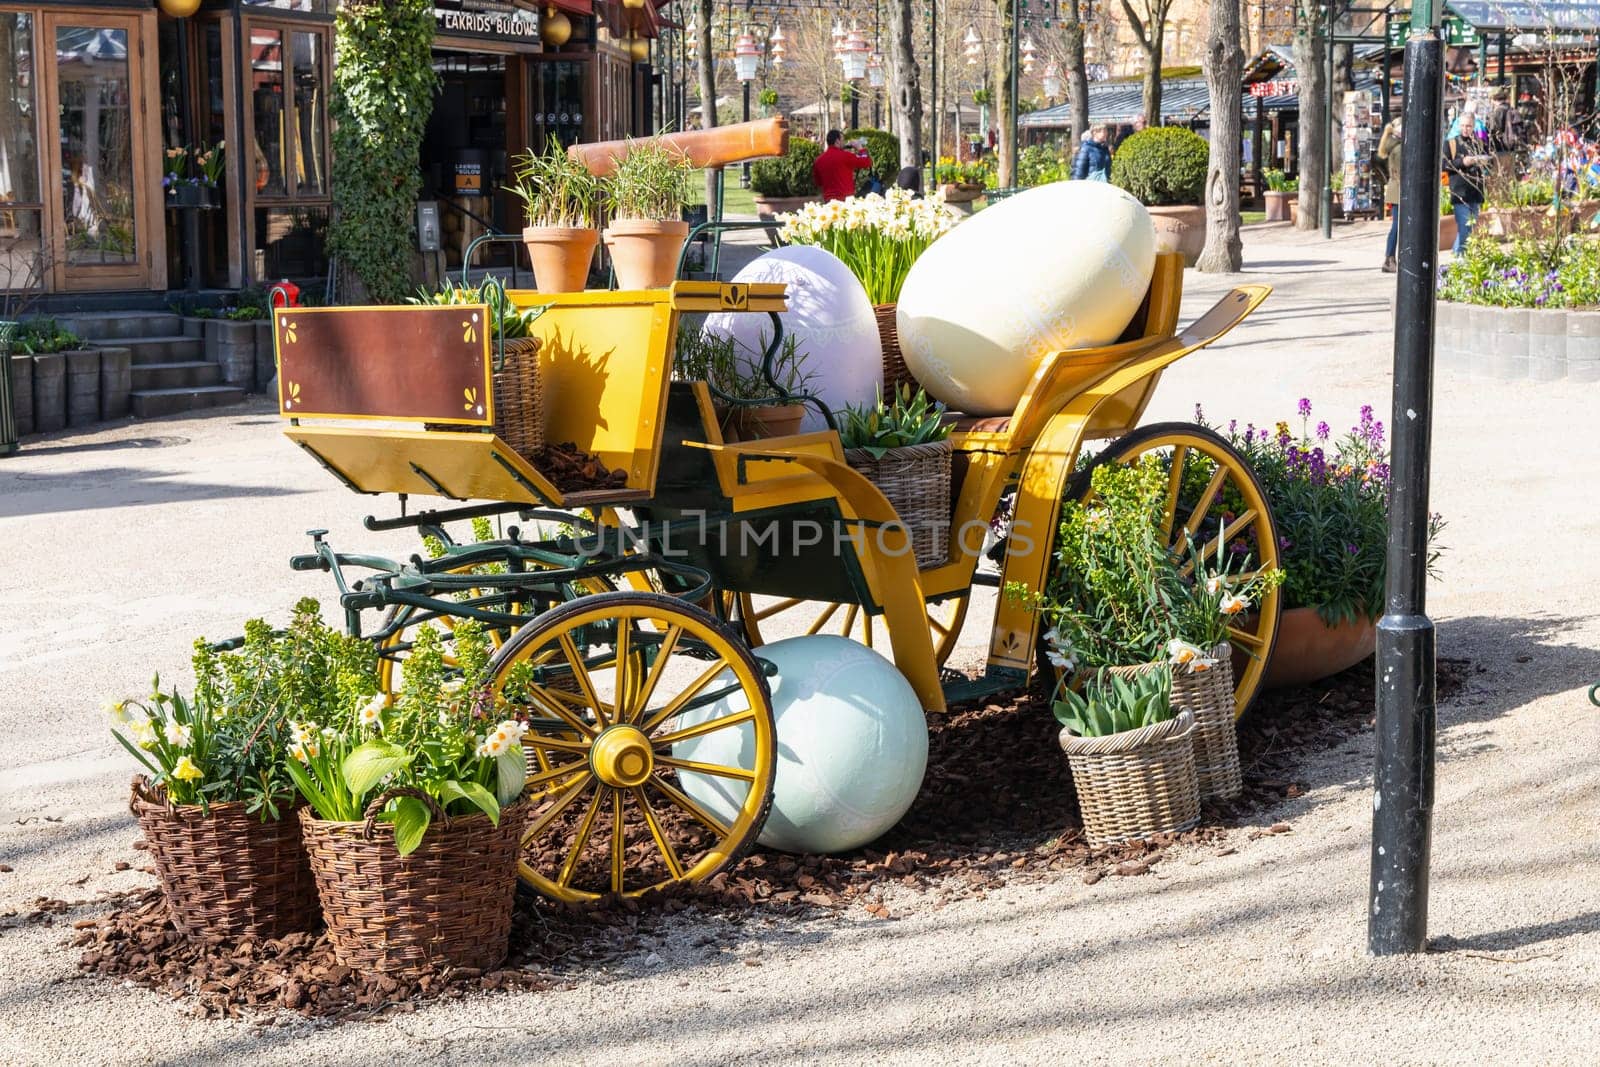 Easter decoration of a carriage with large decorative Easter eggs in a city park. by aniloracru